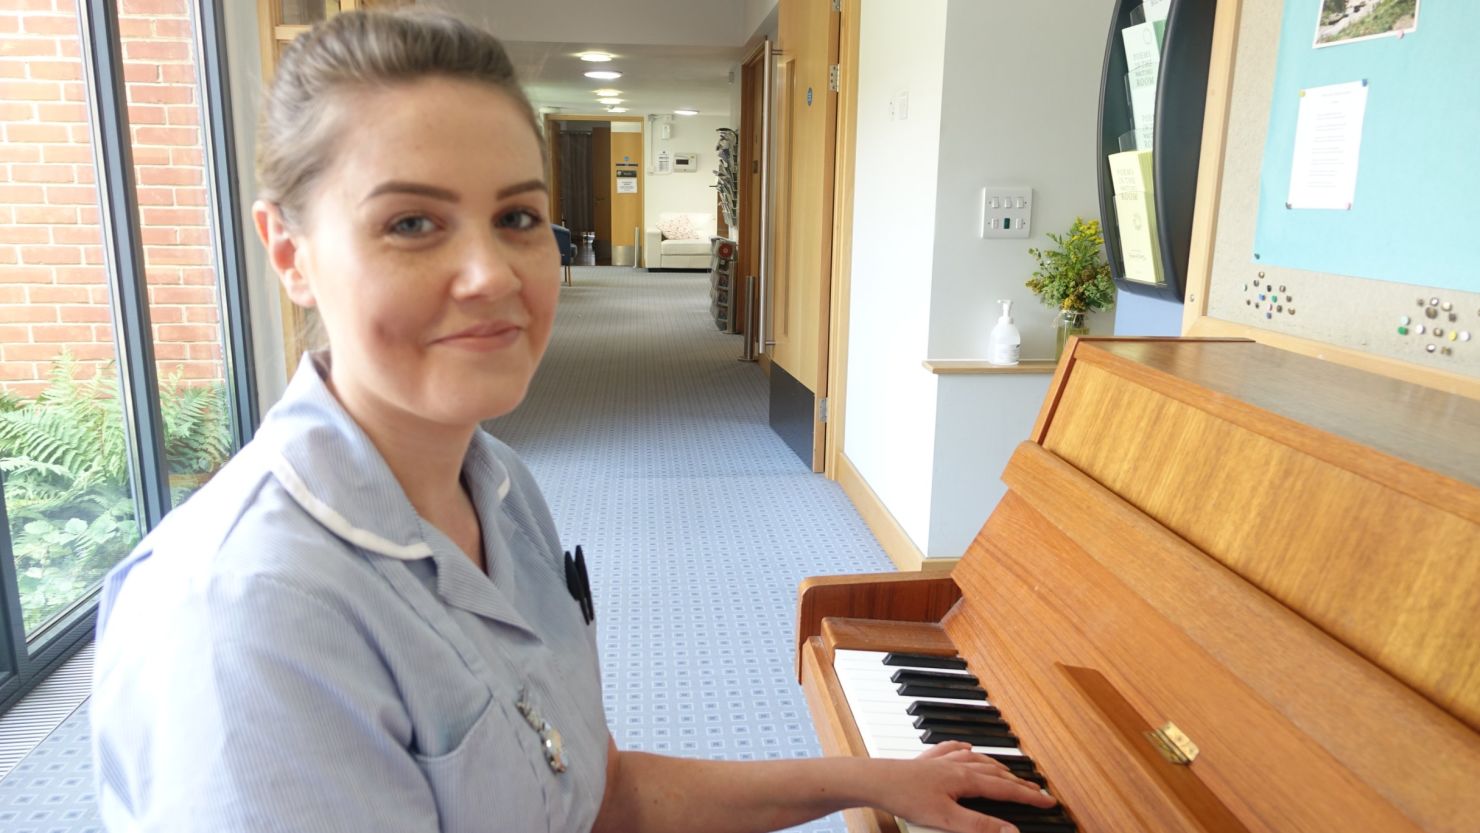 St. Helena Hospice nurse's assistant Emma Young with the piano from the video. 